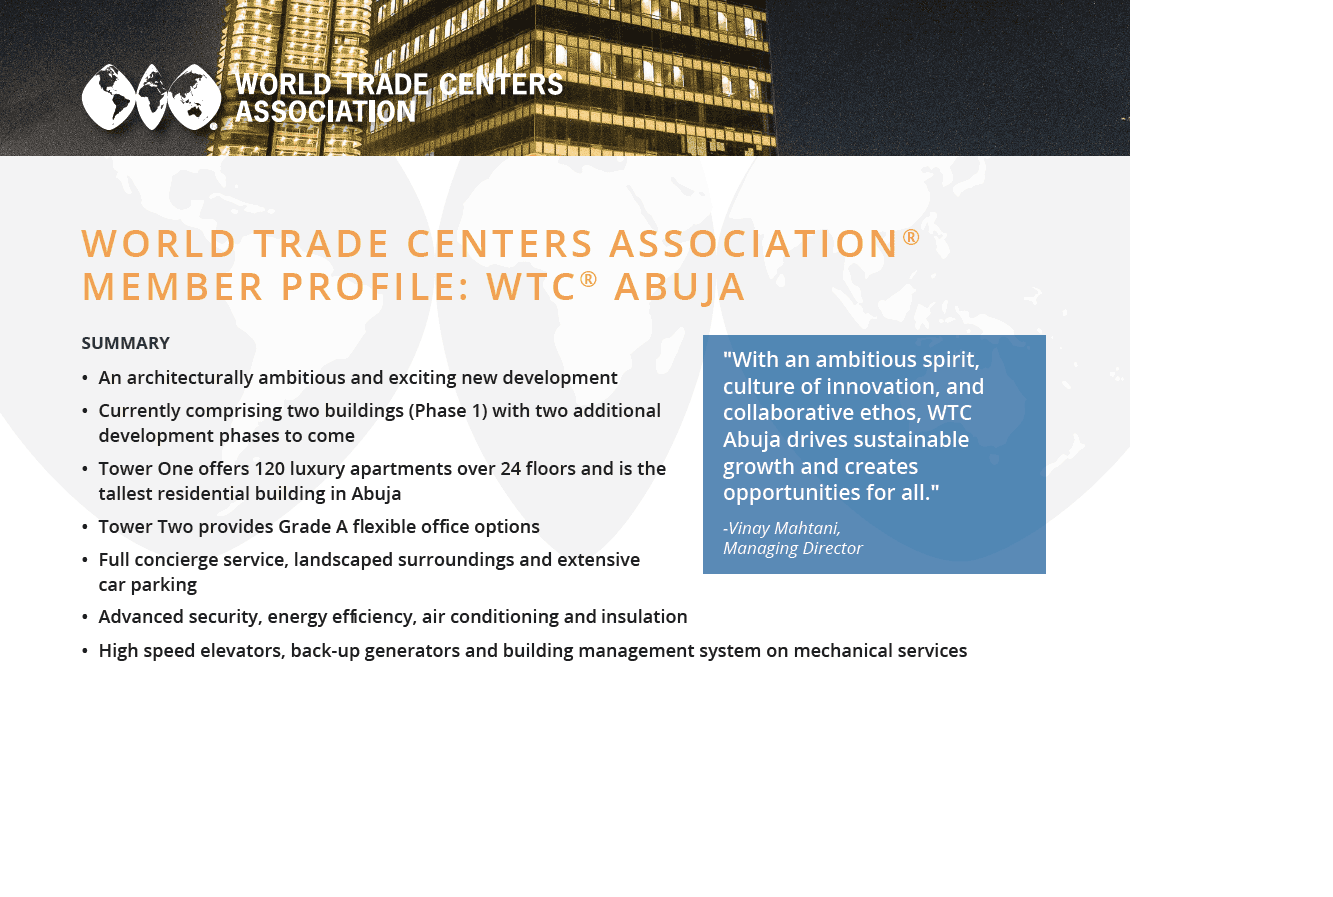 UNVEILING THE EXCEPTIONAL WORLD TRADE CENTER ABUJA: A SPECIAL CASE STORY WITHIN THE WORLD TRADE CENTERS ASSOCIATION MEMBER PROFILE.